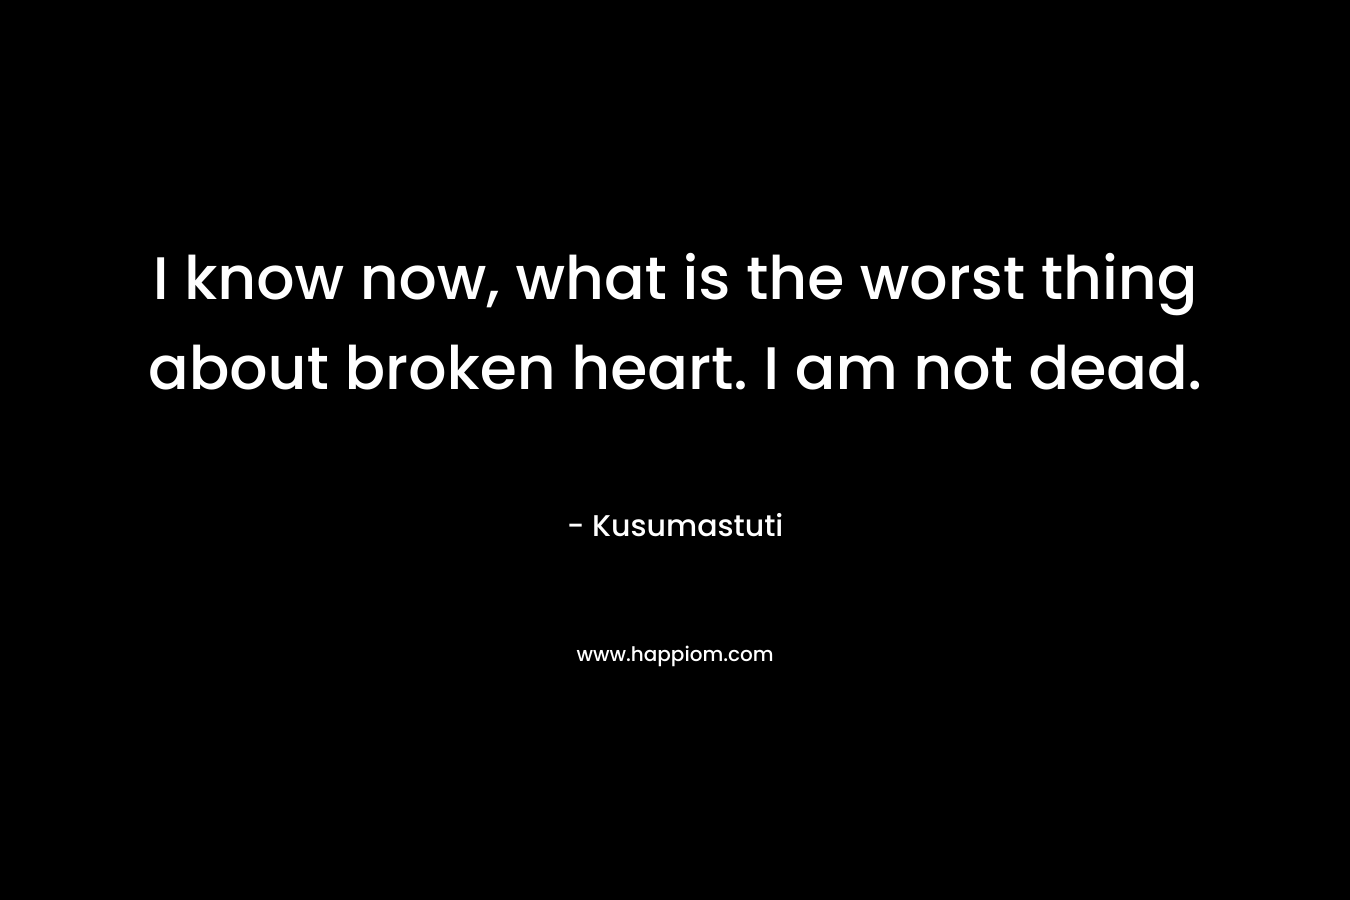 I know now, what is the worst thing about broken heart. I am not dead.